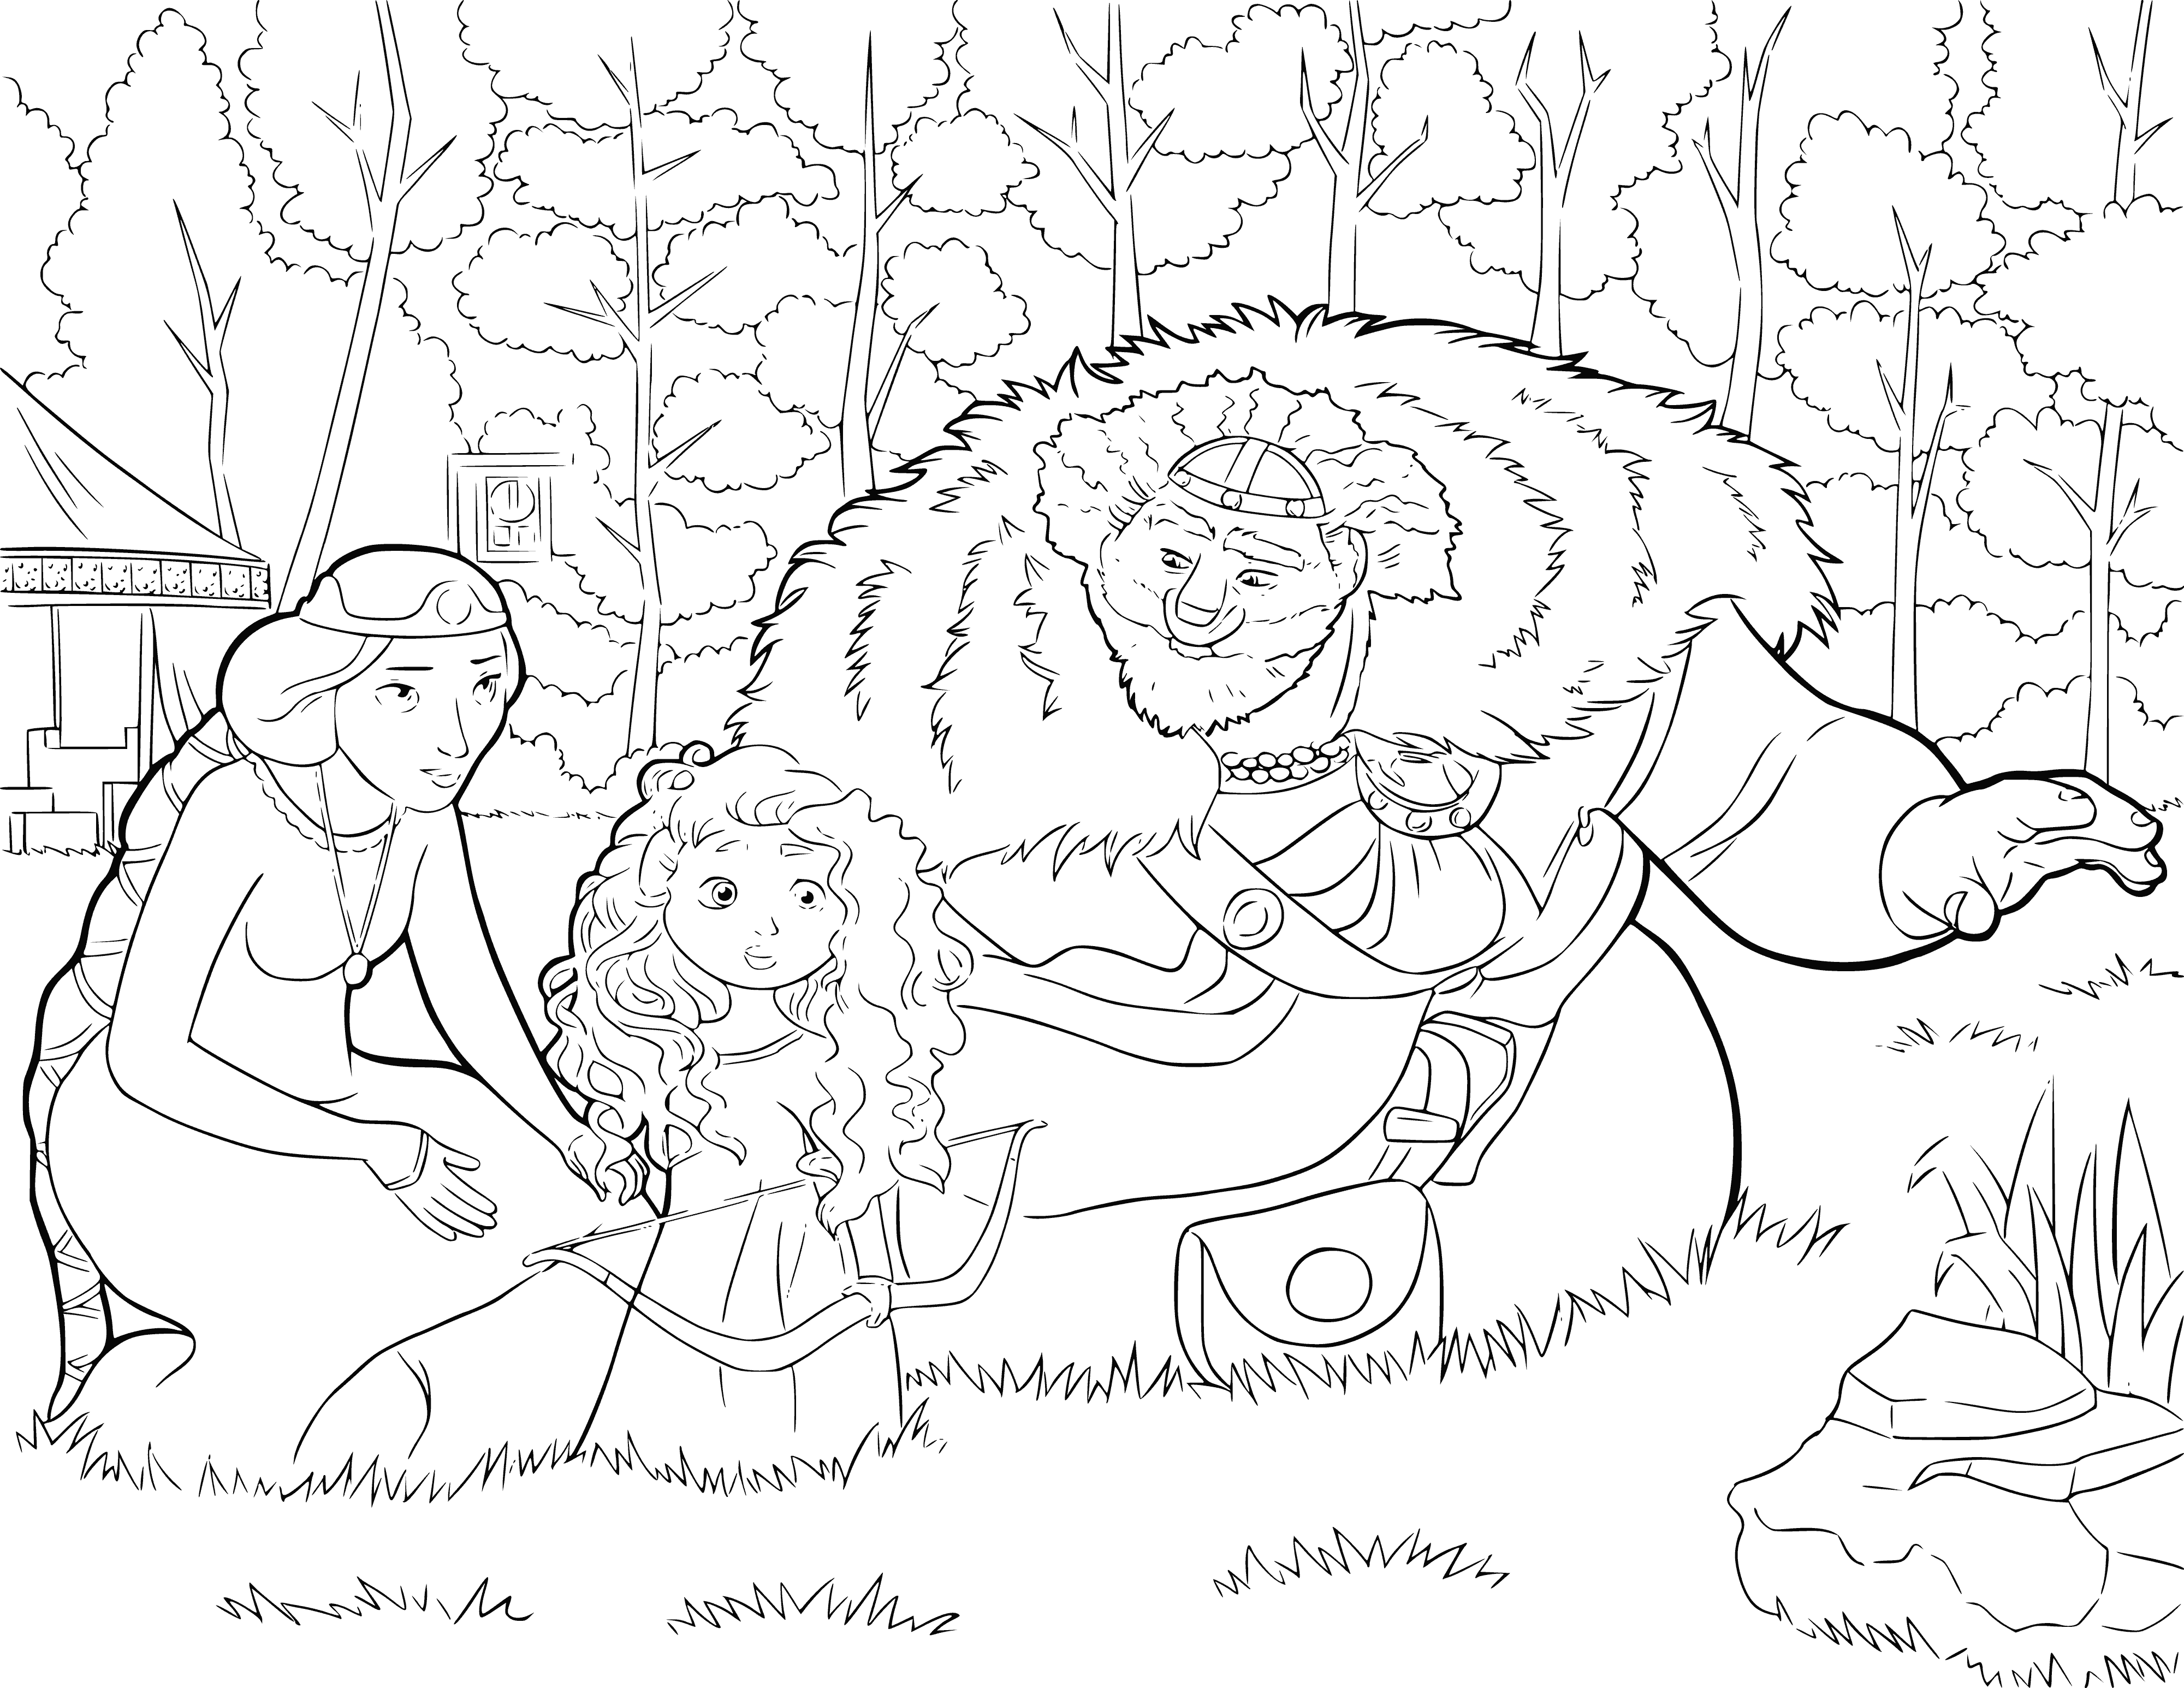 Merida with her father and matter coloring page